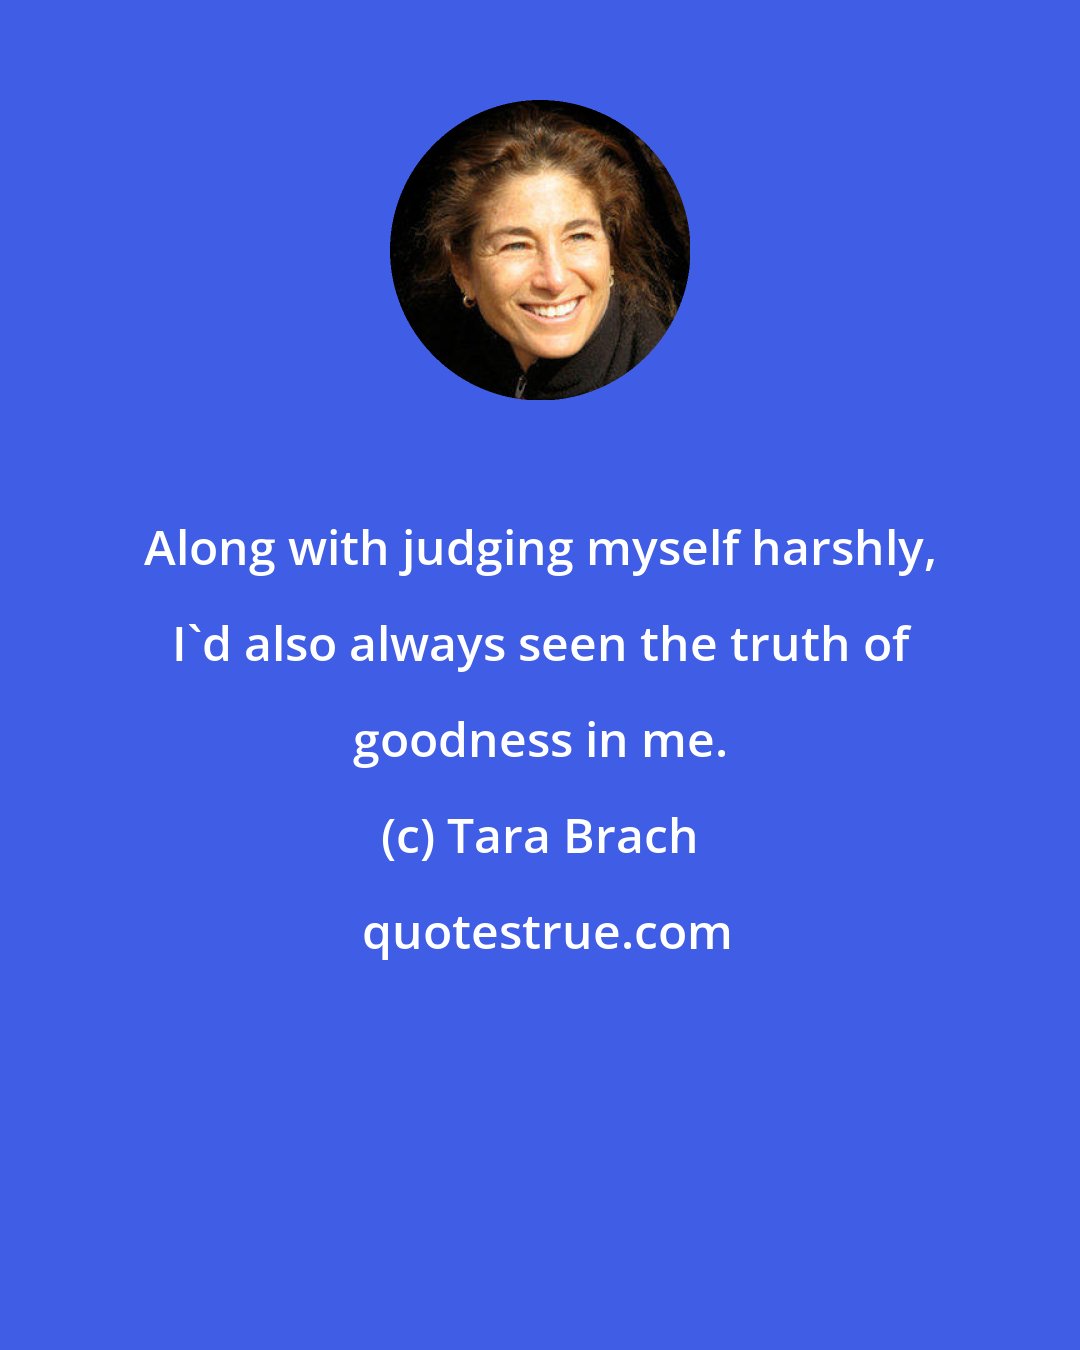 Tara Brach: Along with judging myself harshly, I'd also always seen the truth of goodness in me.